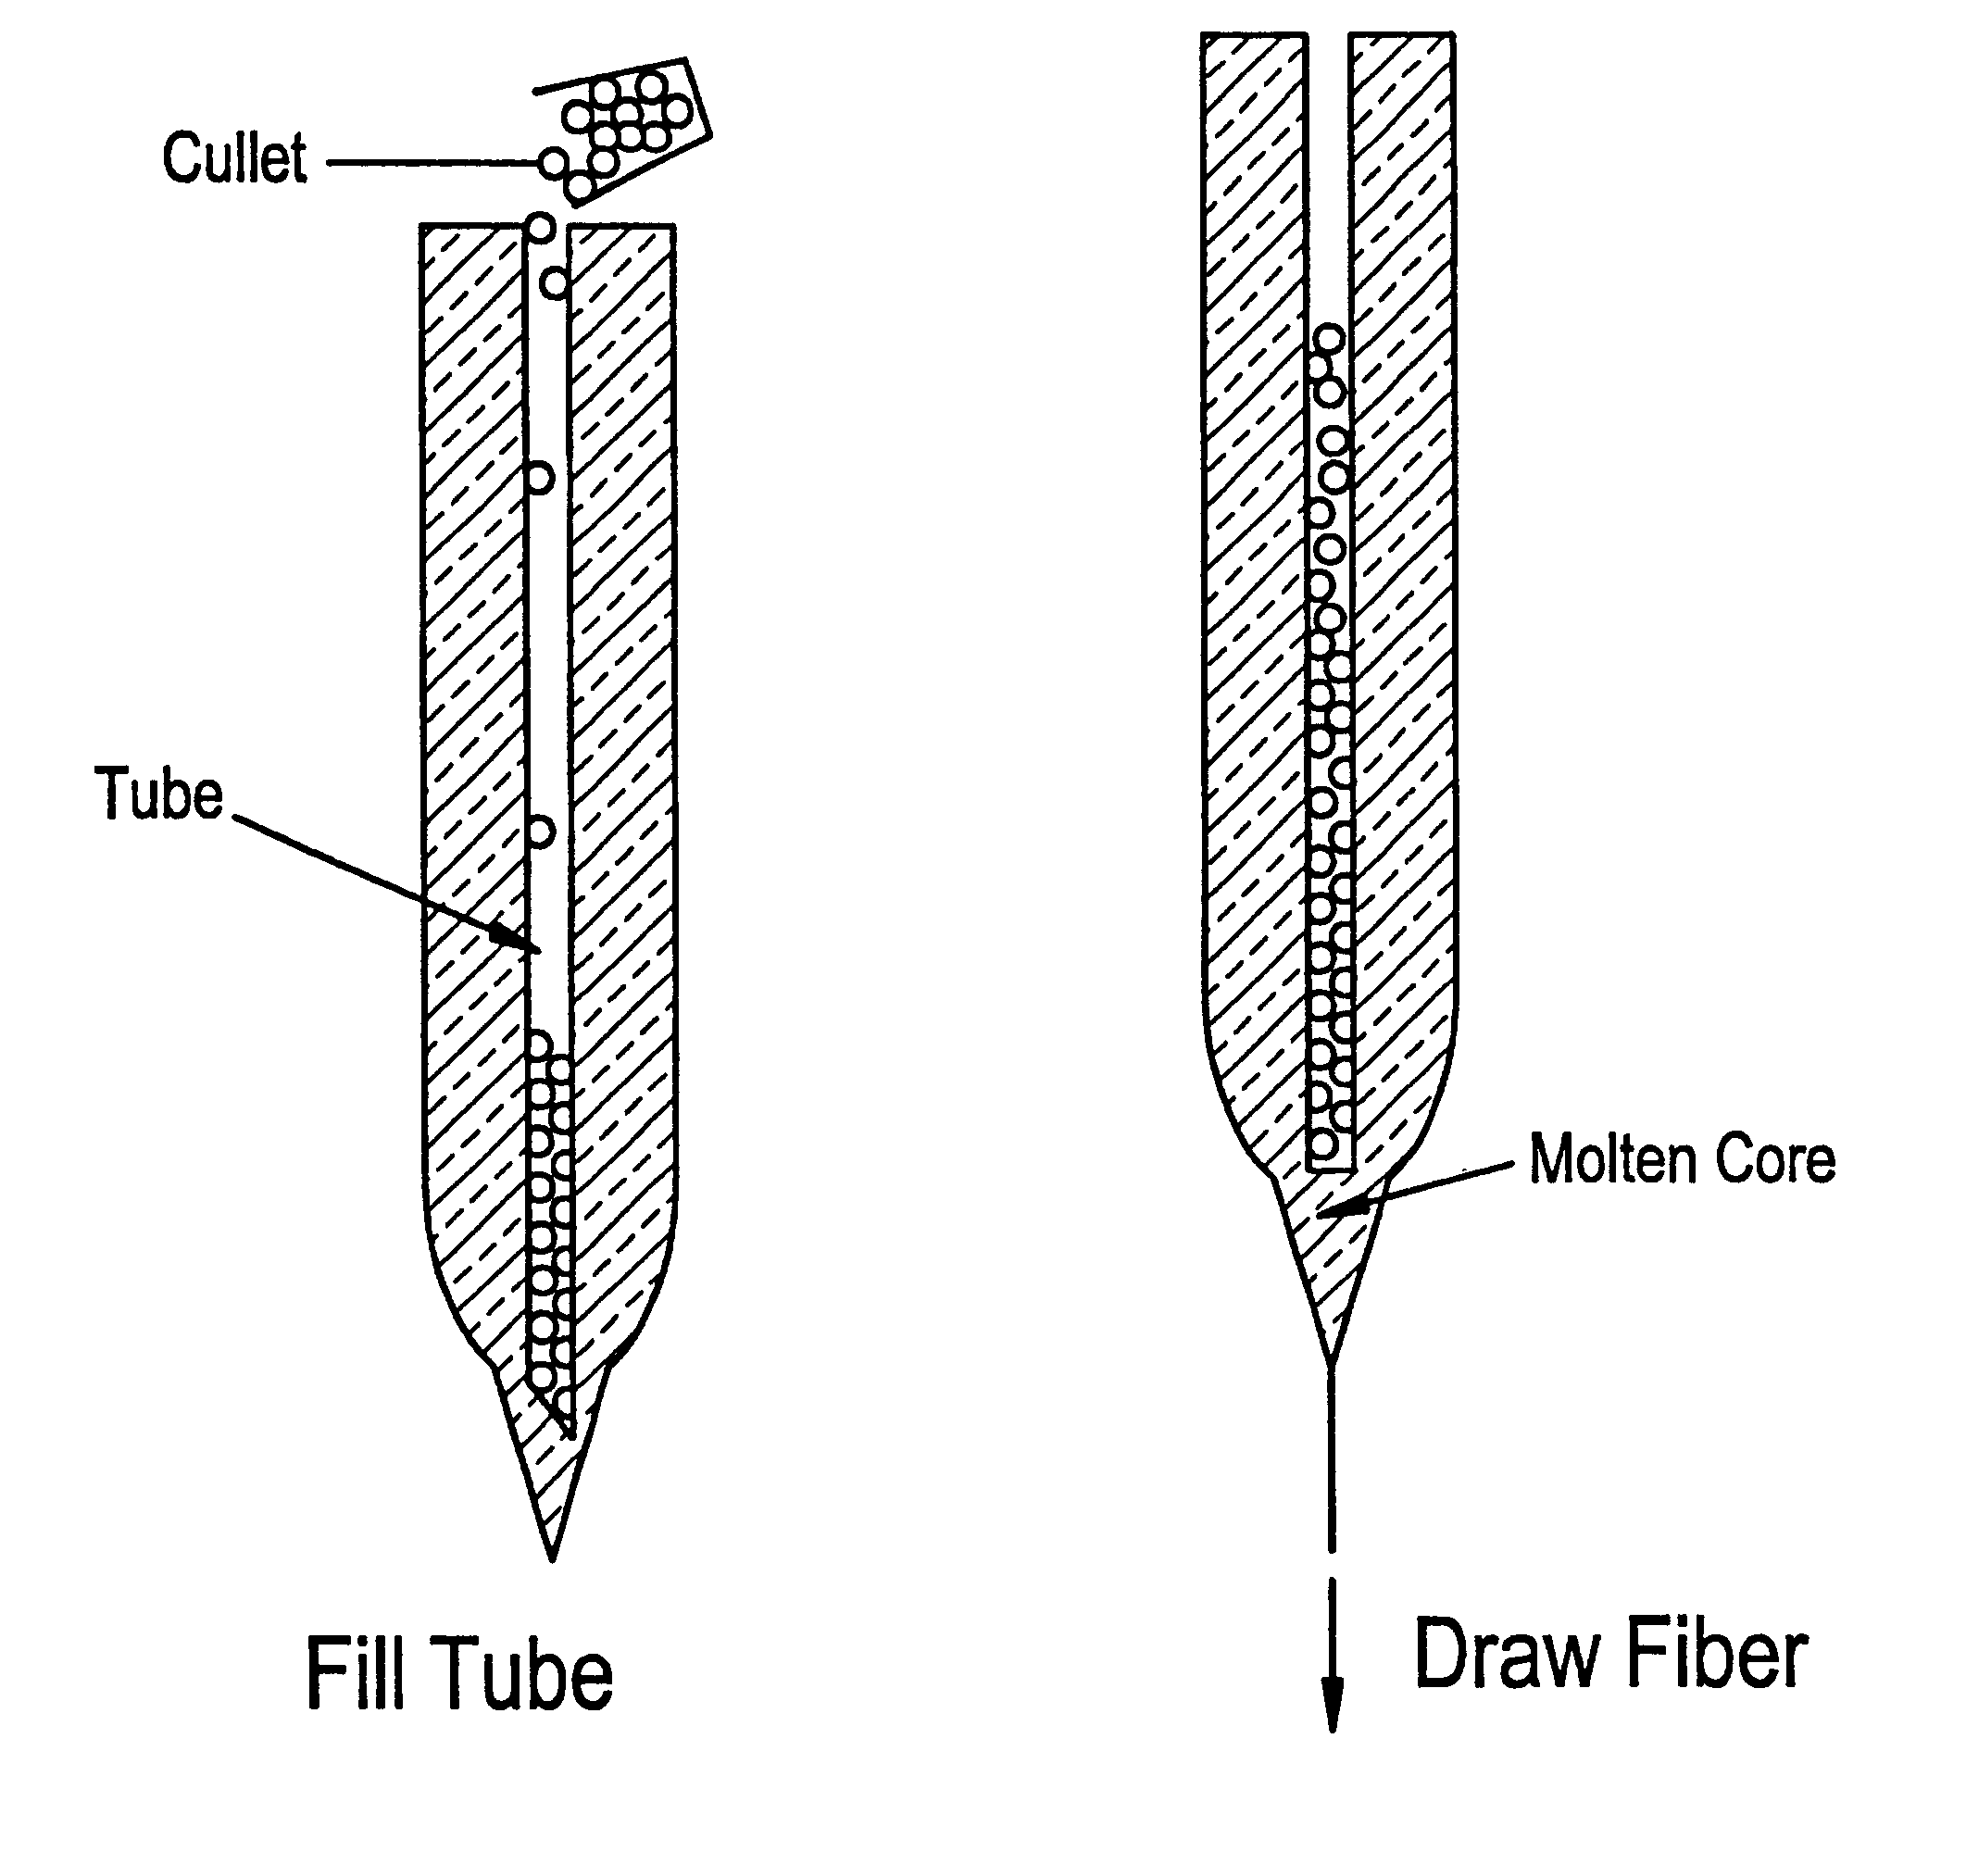 Method of making an optical fiber by melting particulate glass in a glass cladding tube